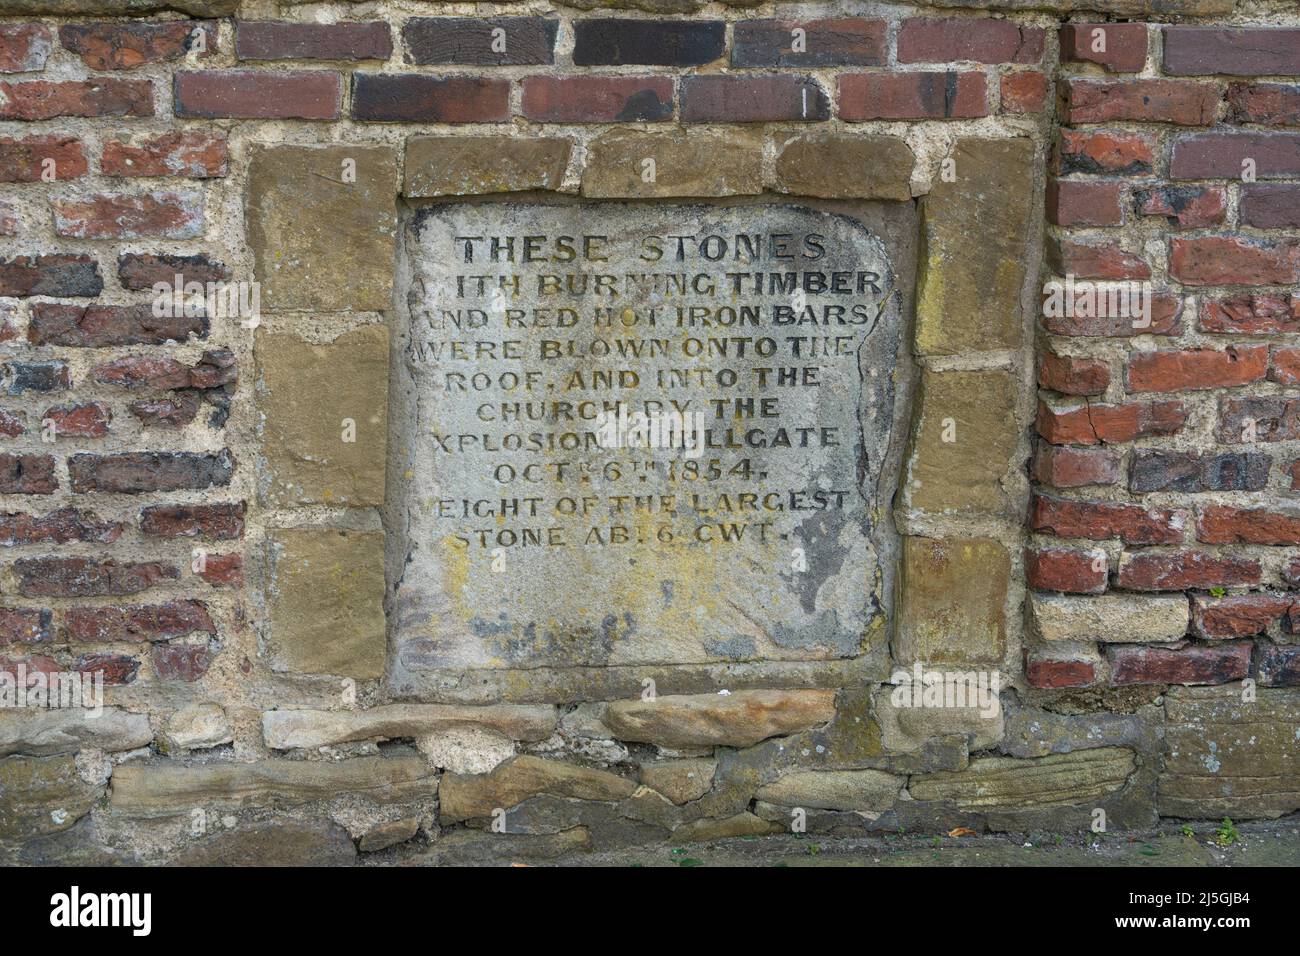 Stones in the wall outside St Mary's, Gateshead, UK, that were propelled onto the church by an explosion and telling story of the Great Fire of 1854. Stock Photo